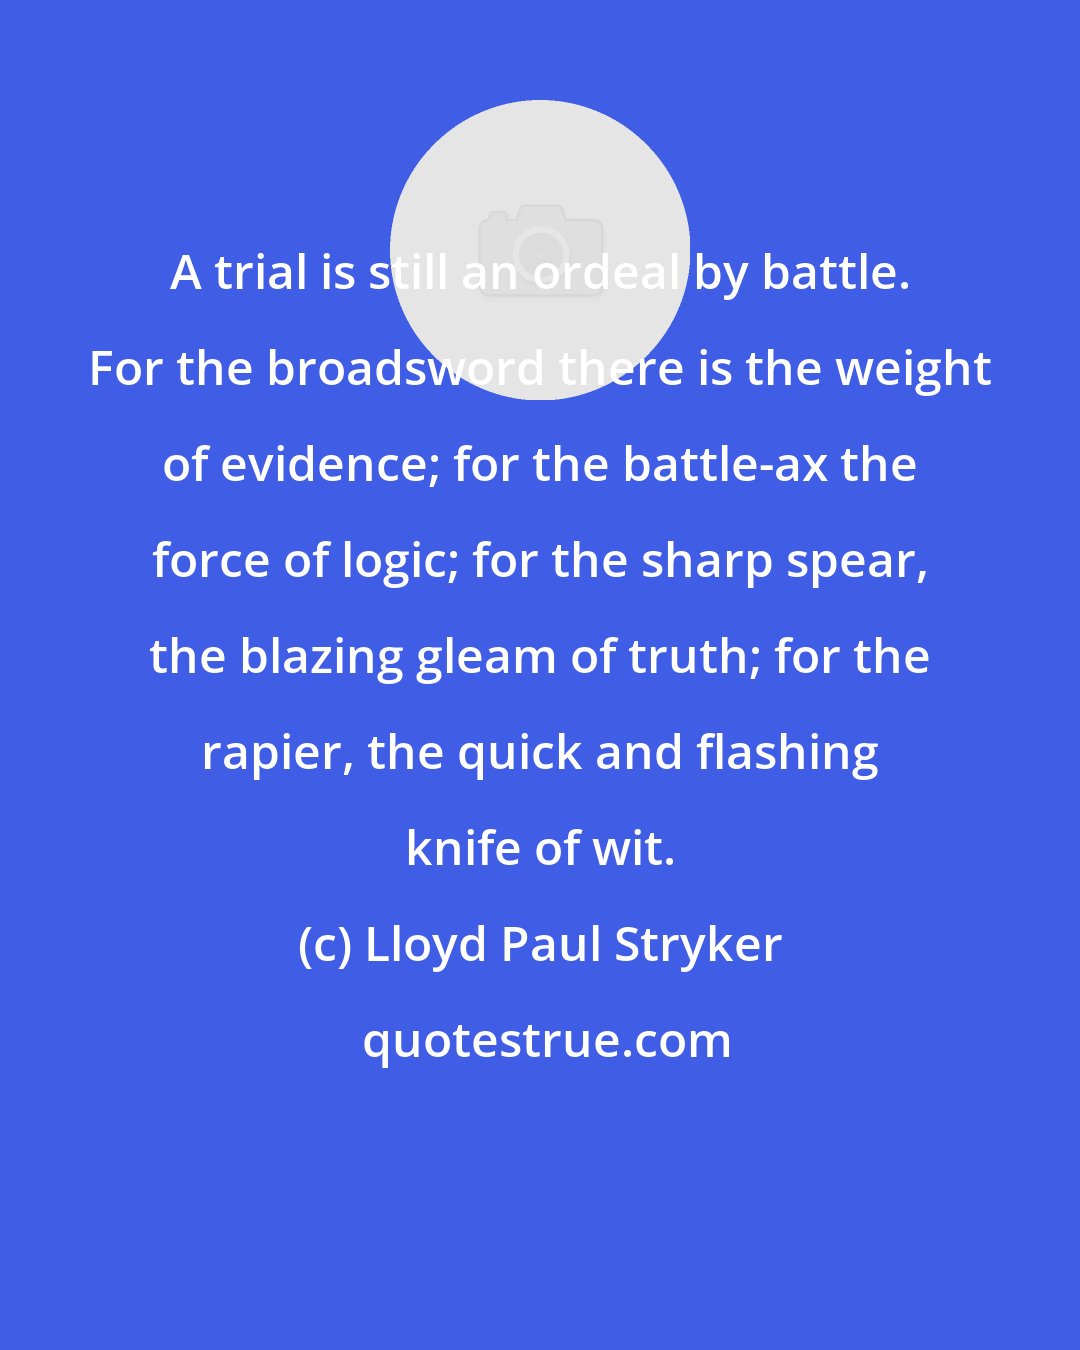 Lloyd Paul Stryker: A trial is still an ordeal by battle. For the broadsword there is the weight of evidence; for the battle-ax the force of logic; for the sharp spear, the blazing gleam of truth; for the rapier, the quick and flashing knife of wit.